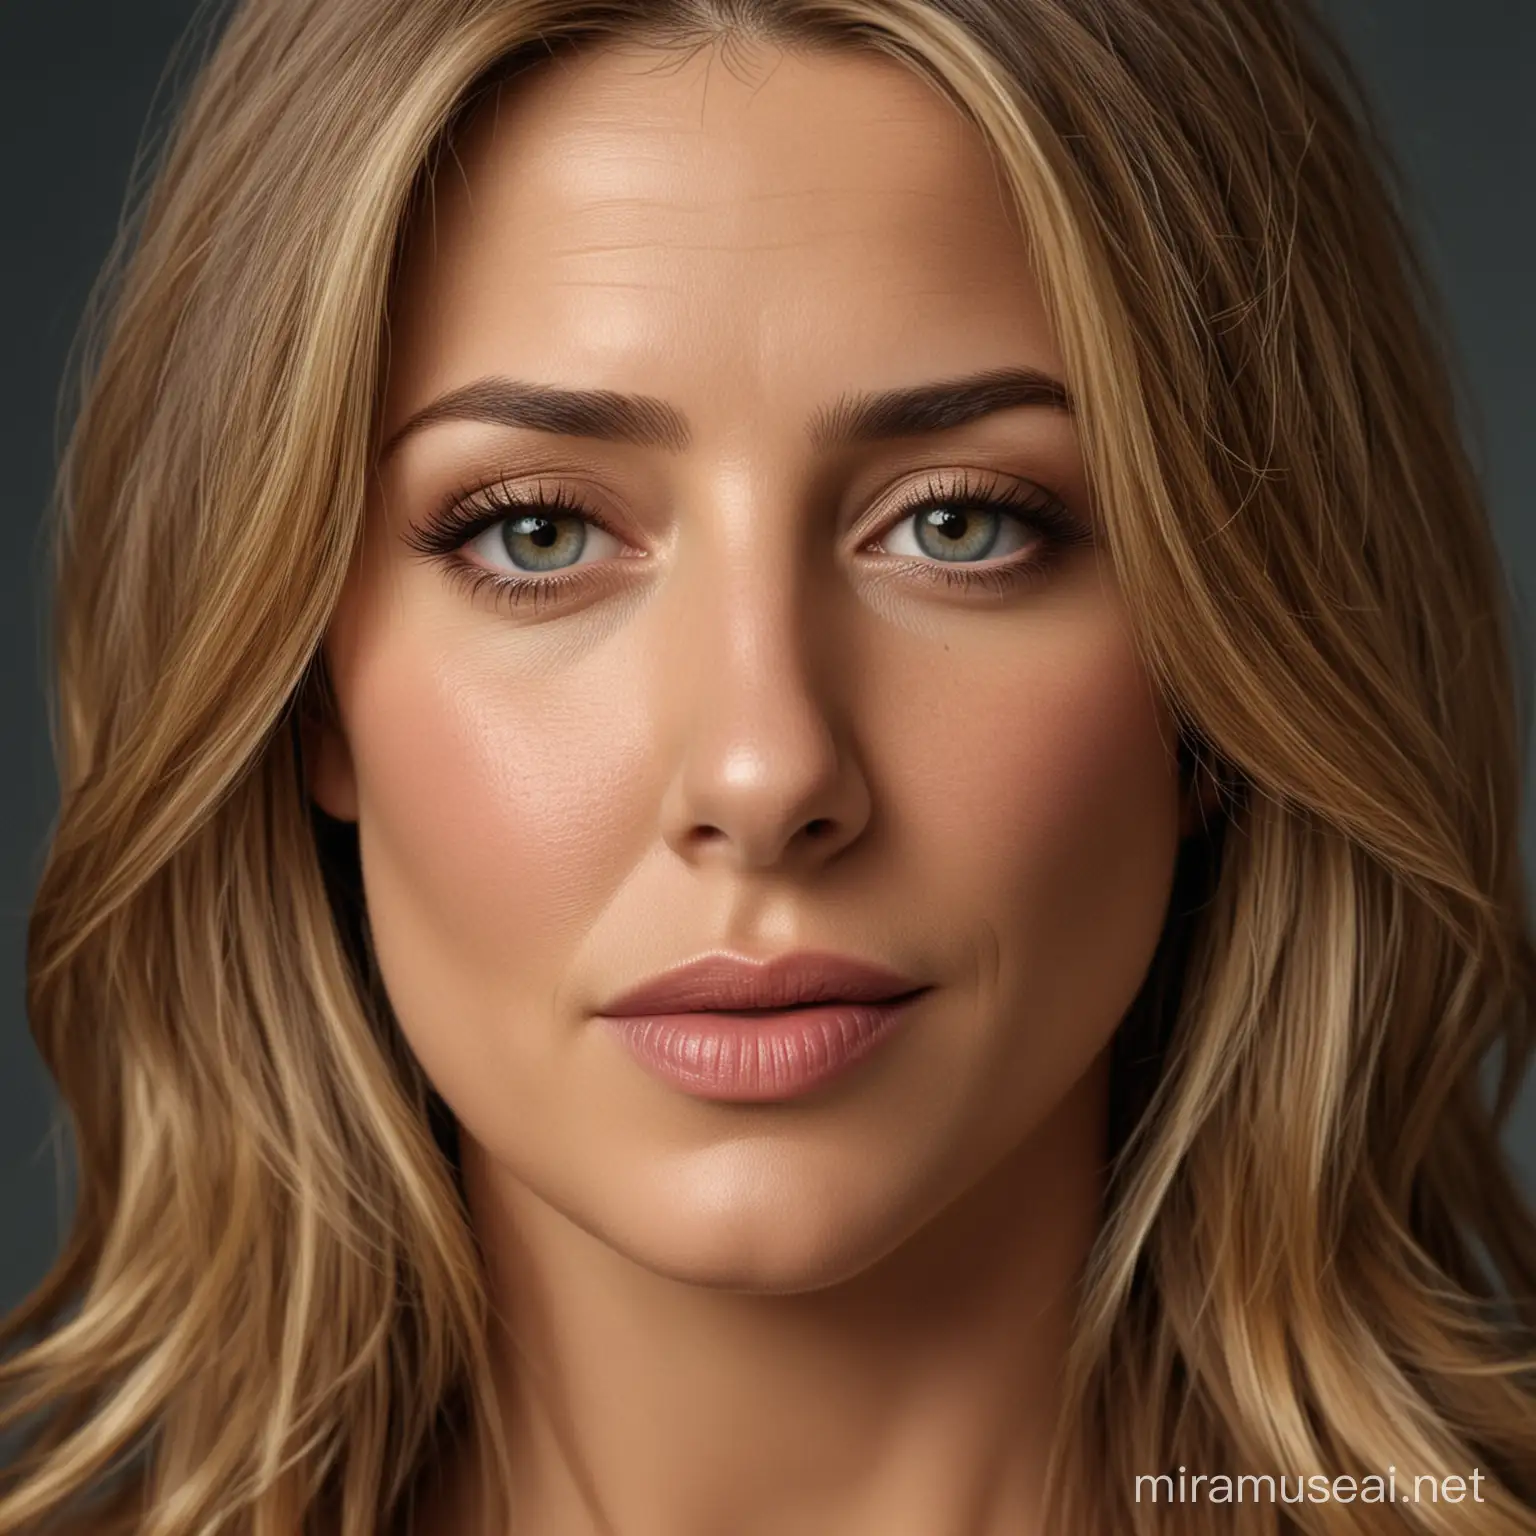 Realistic Photography of Jennifer Aniston in Raw Style